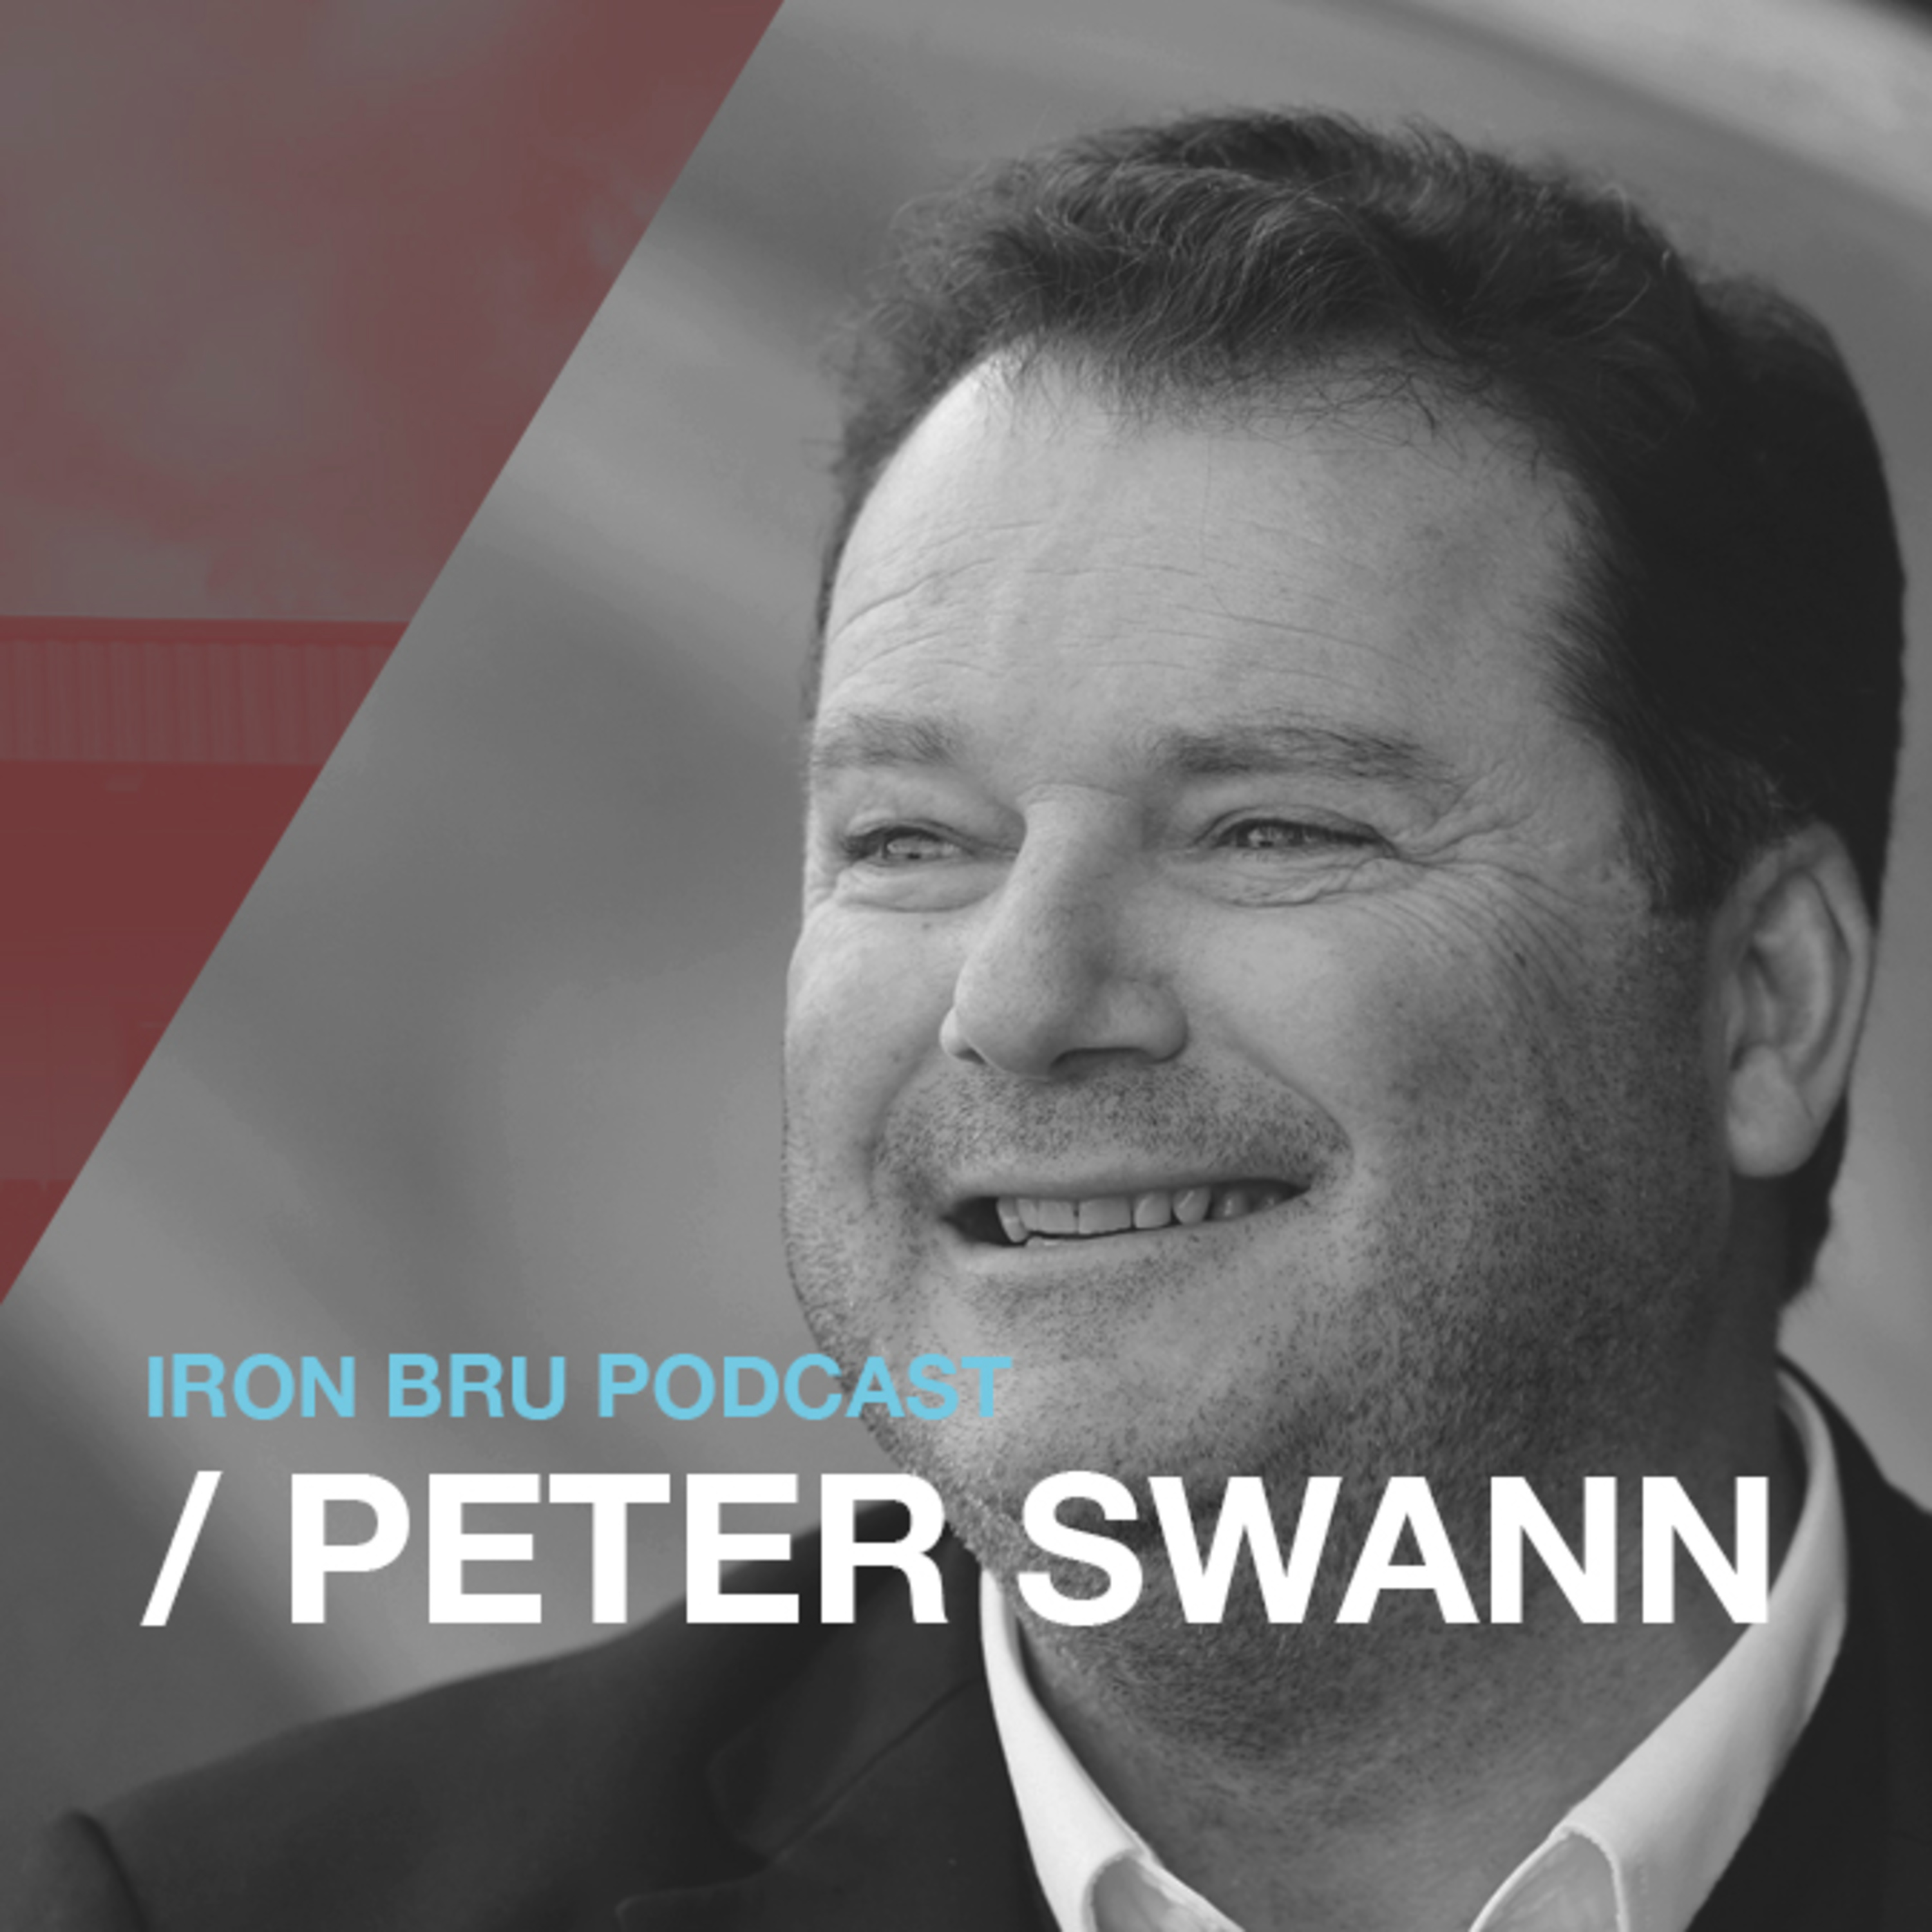 In conversation with Peter Swann